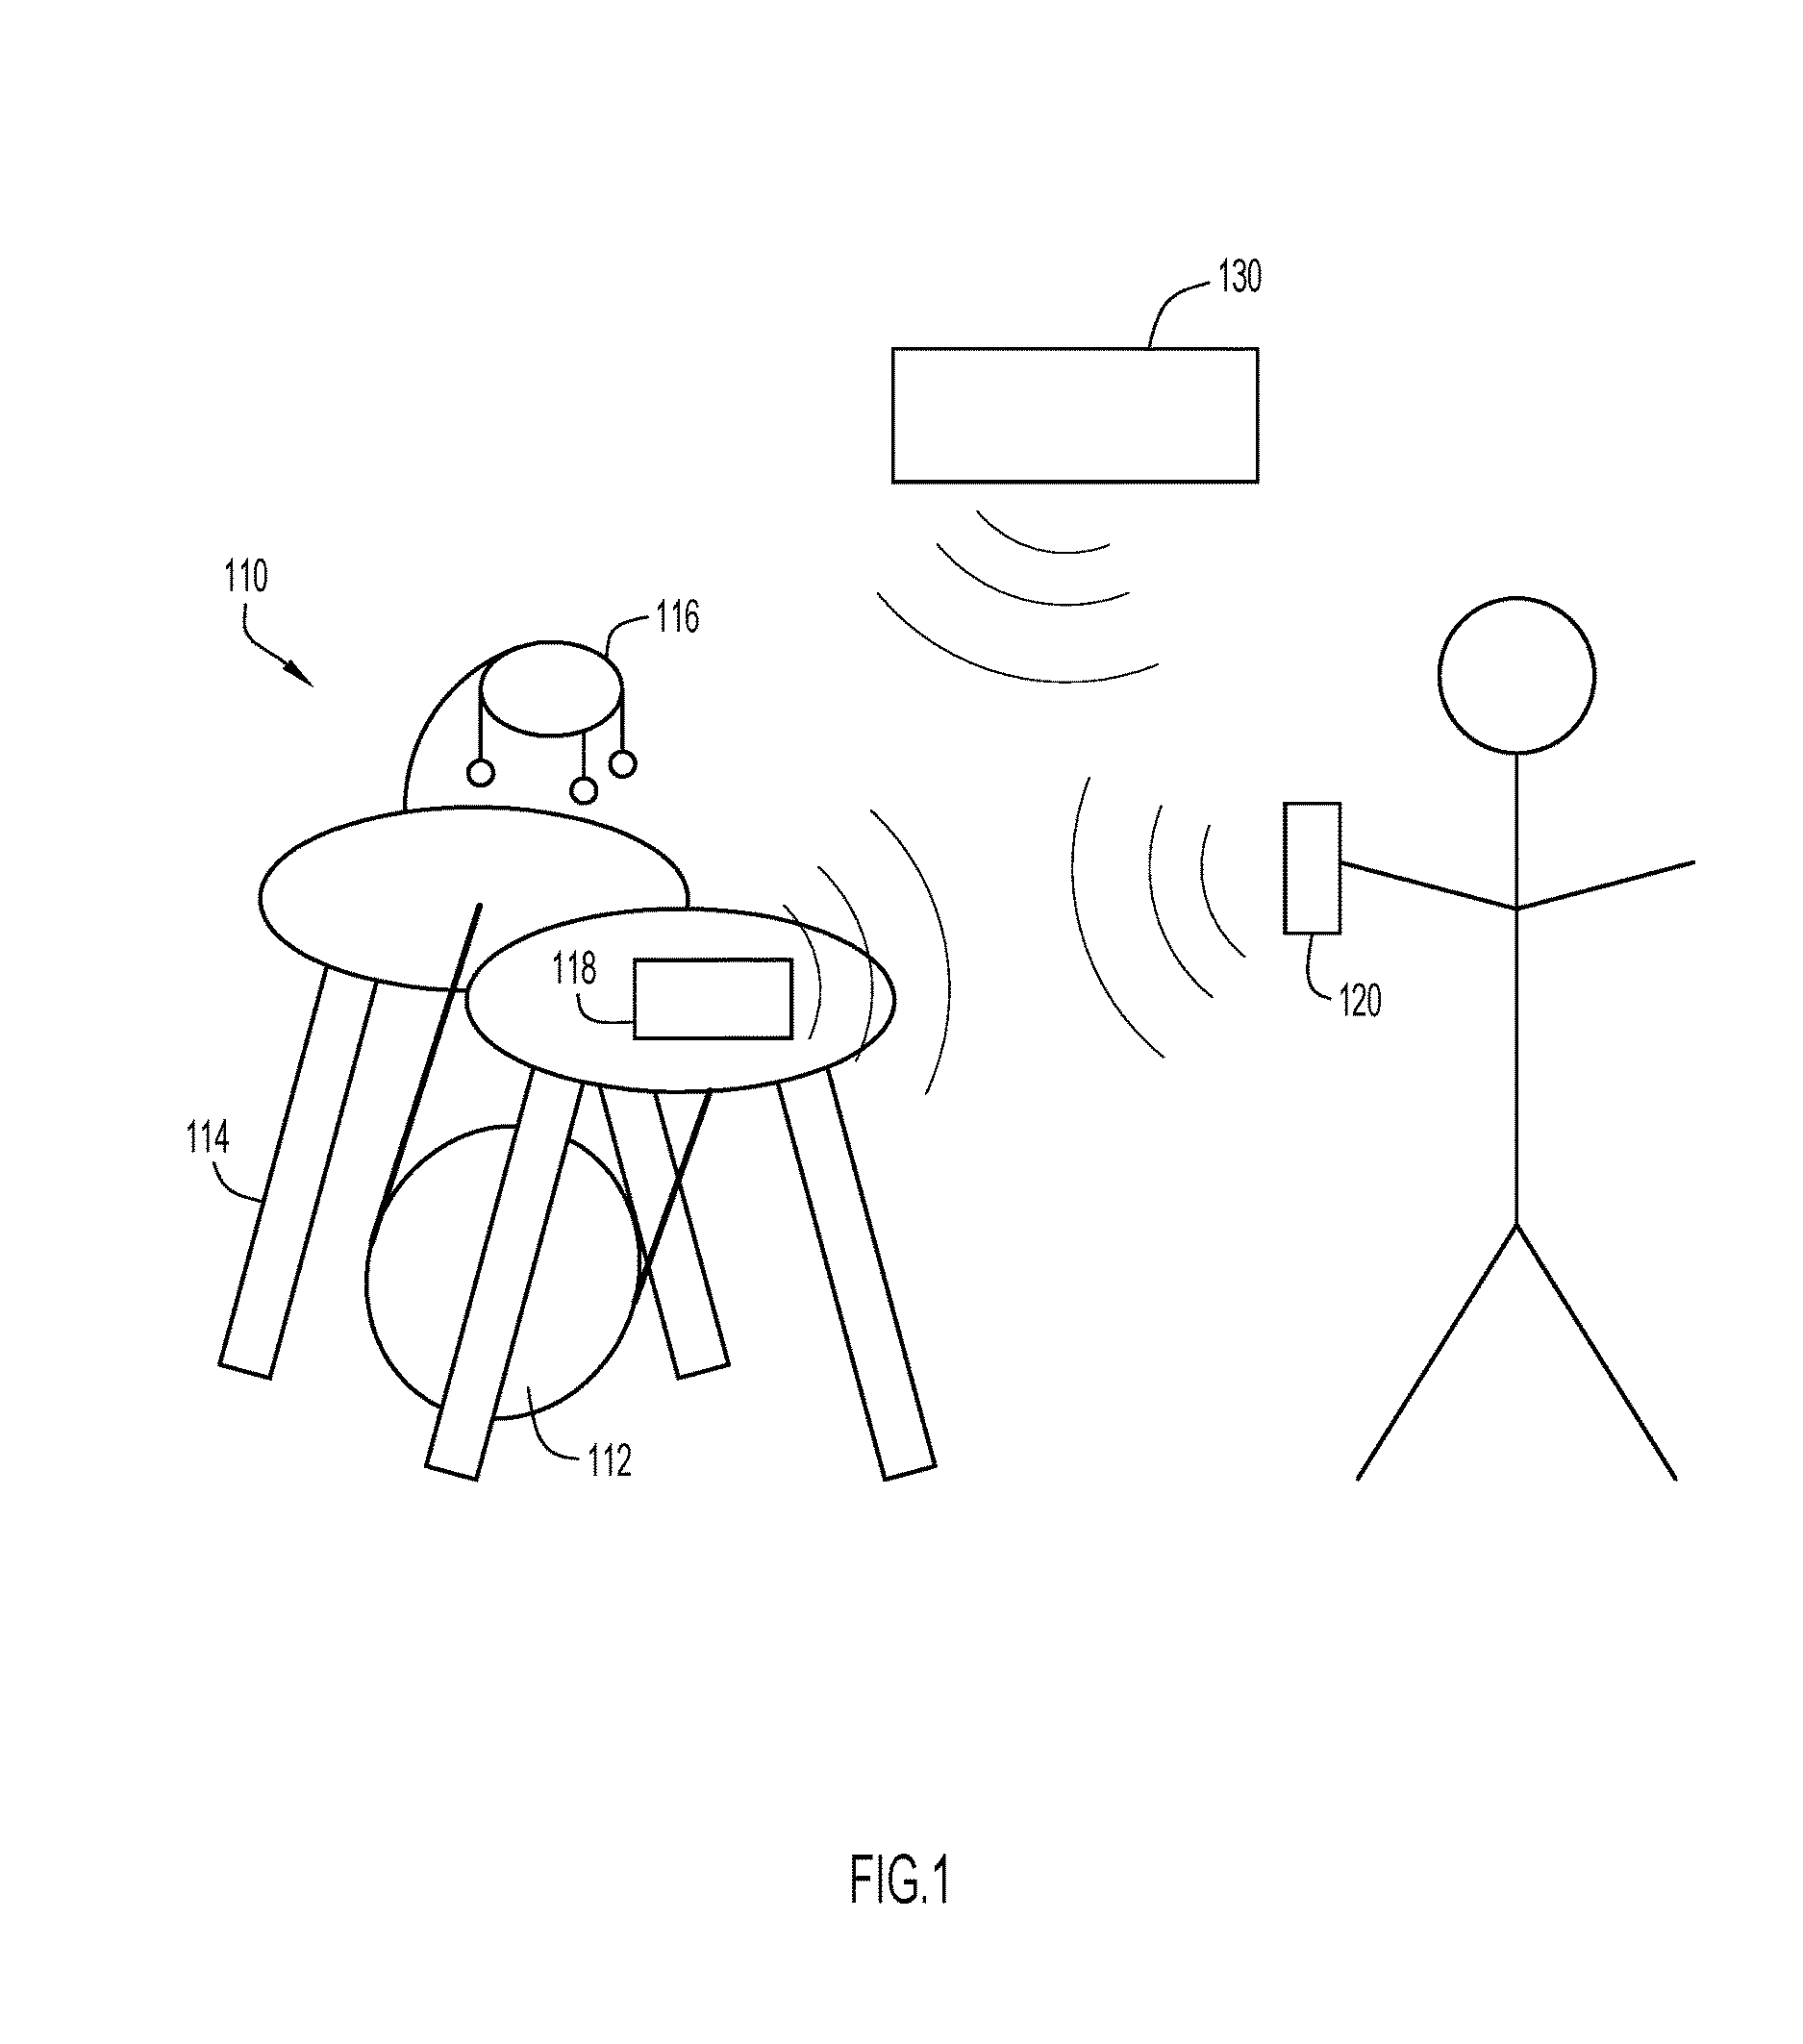 Bidirectional communication between an infant receiving system and a remote device